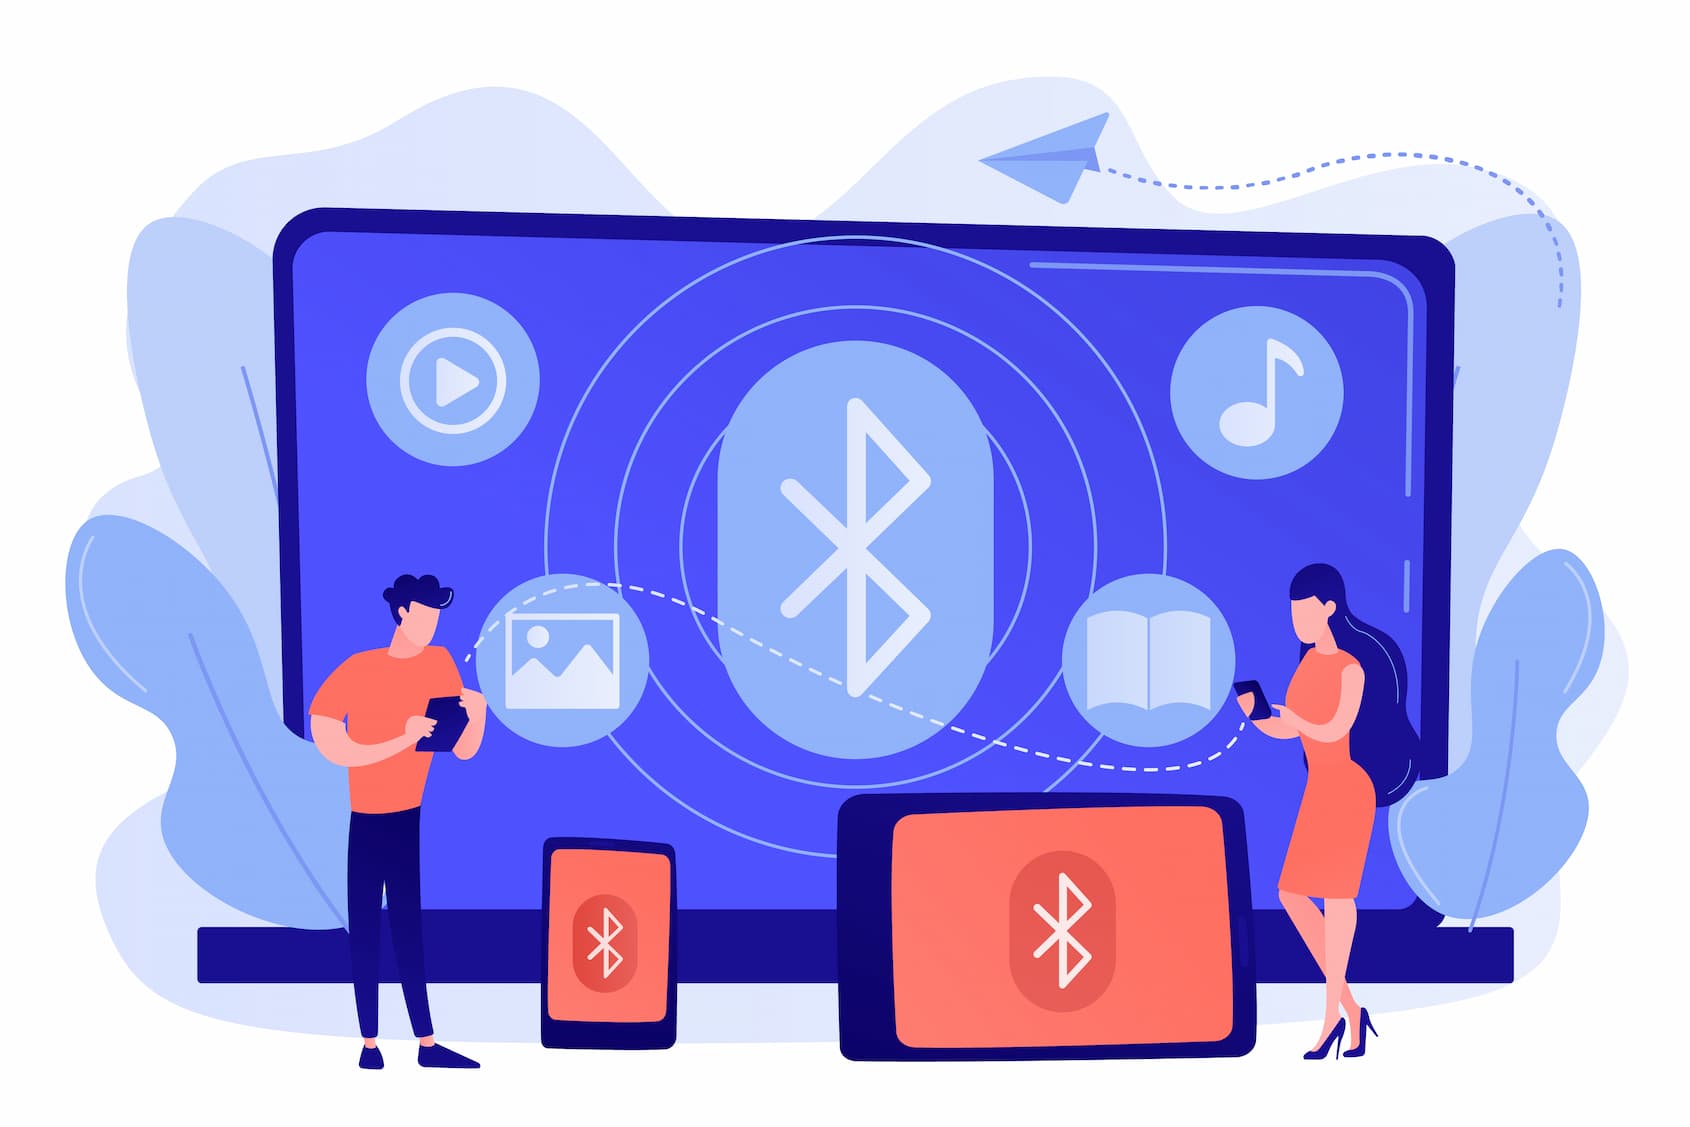 Different uses of Bluetooth technology for wireless connectivity